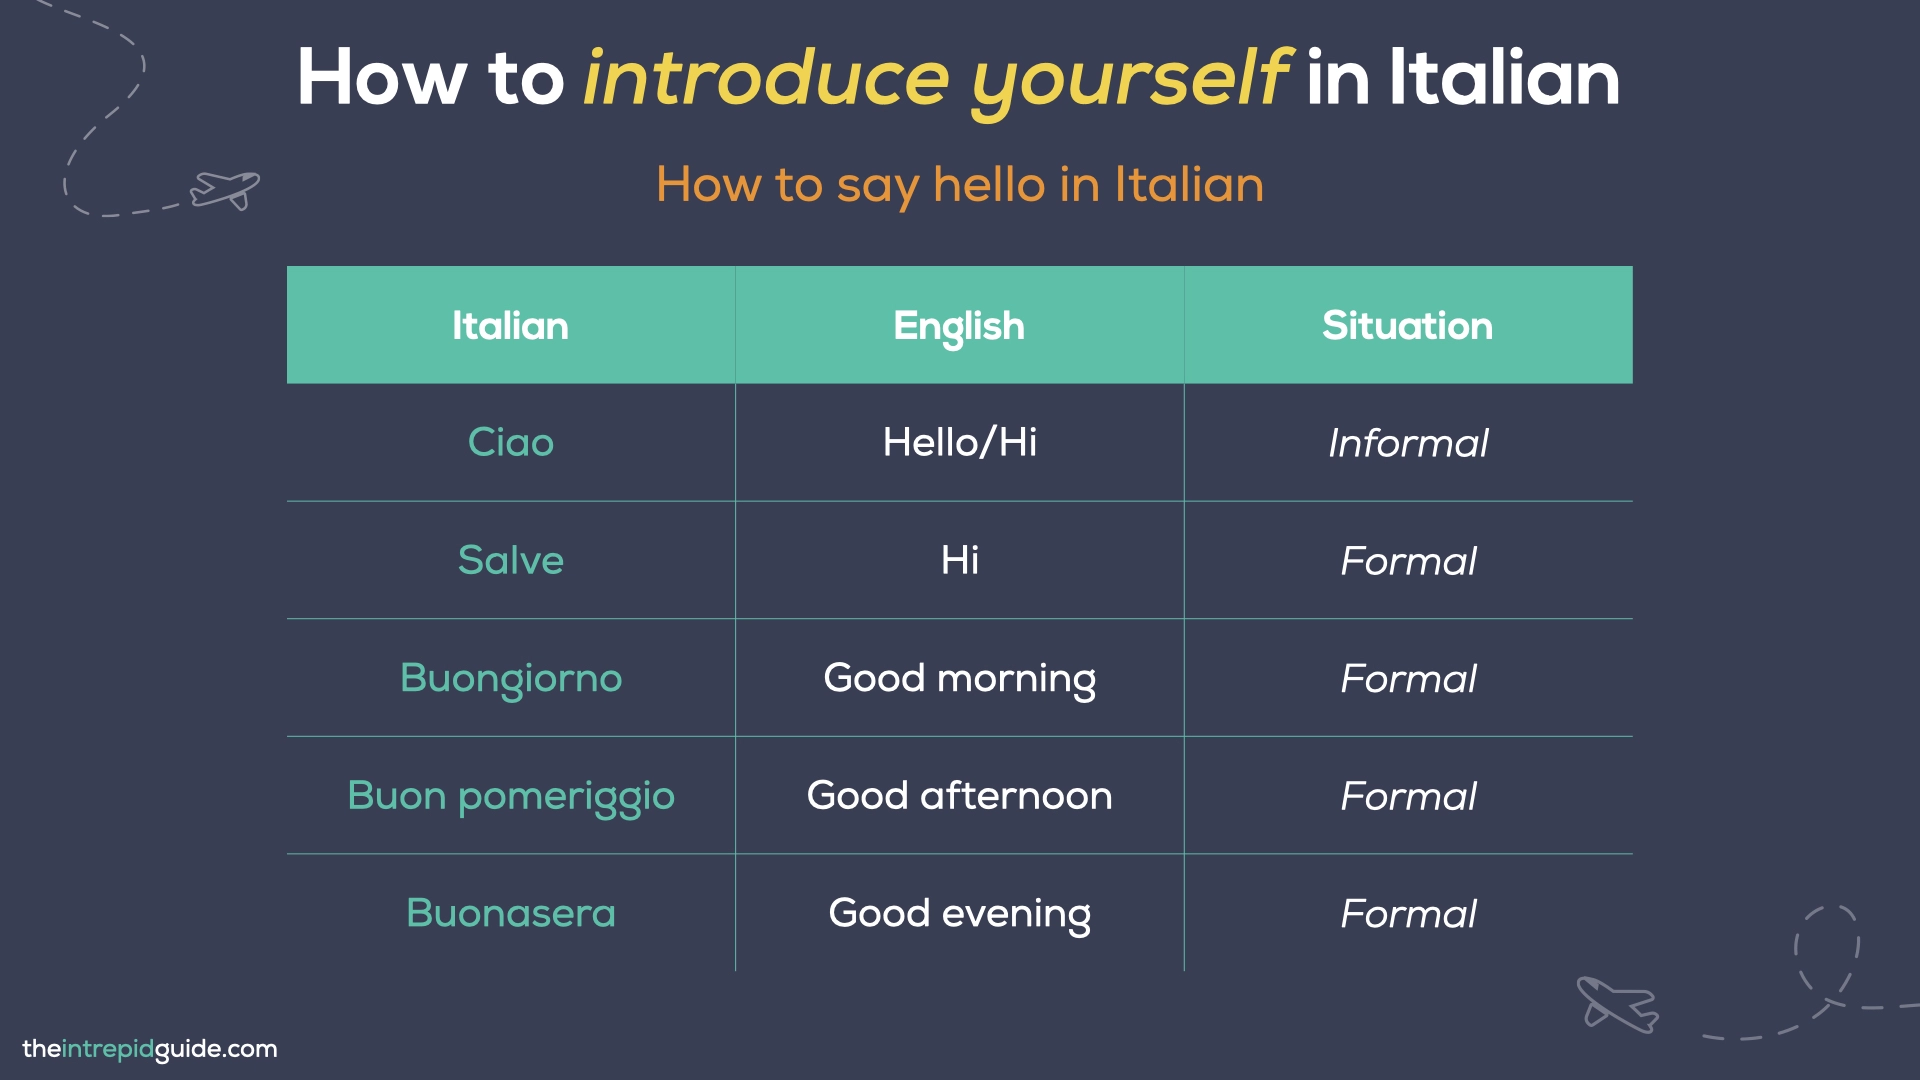 How to introduce yourself in Italian - How to say hello in Italian